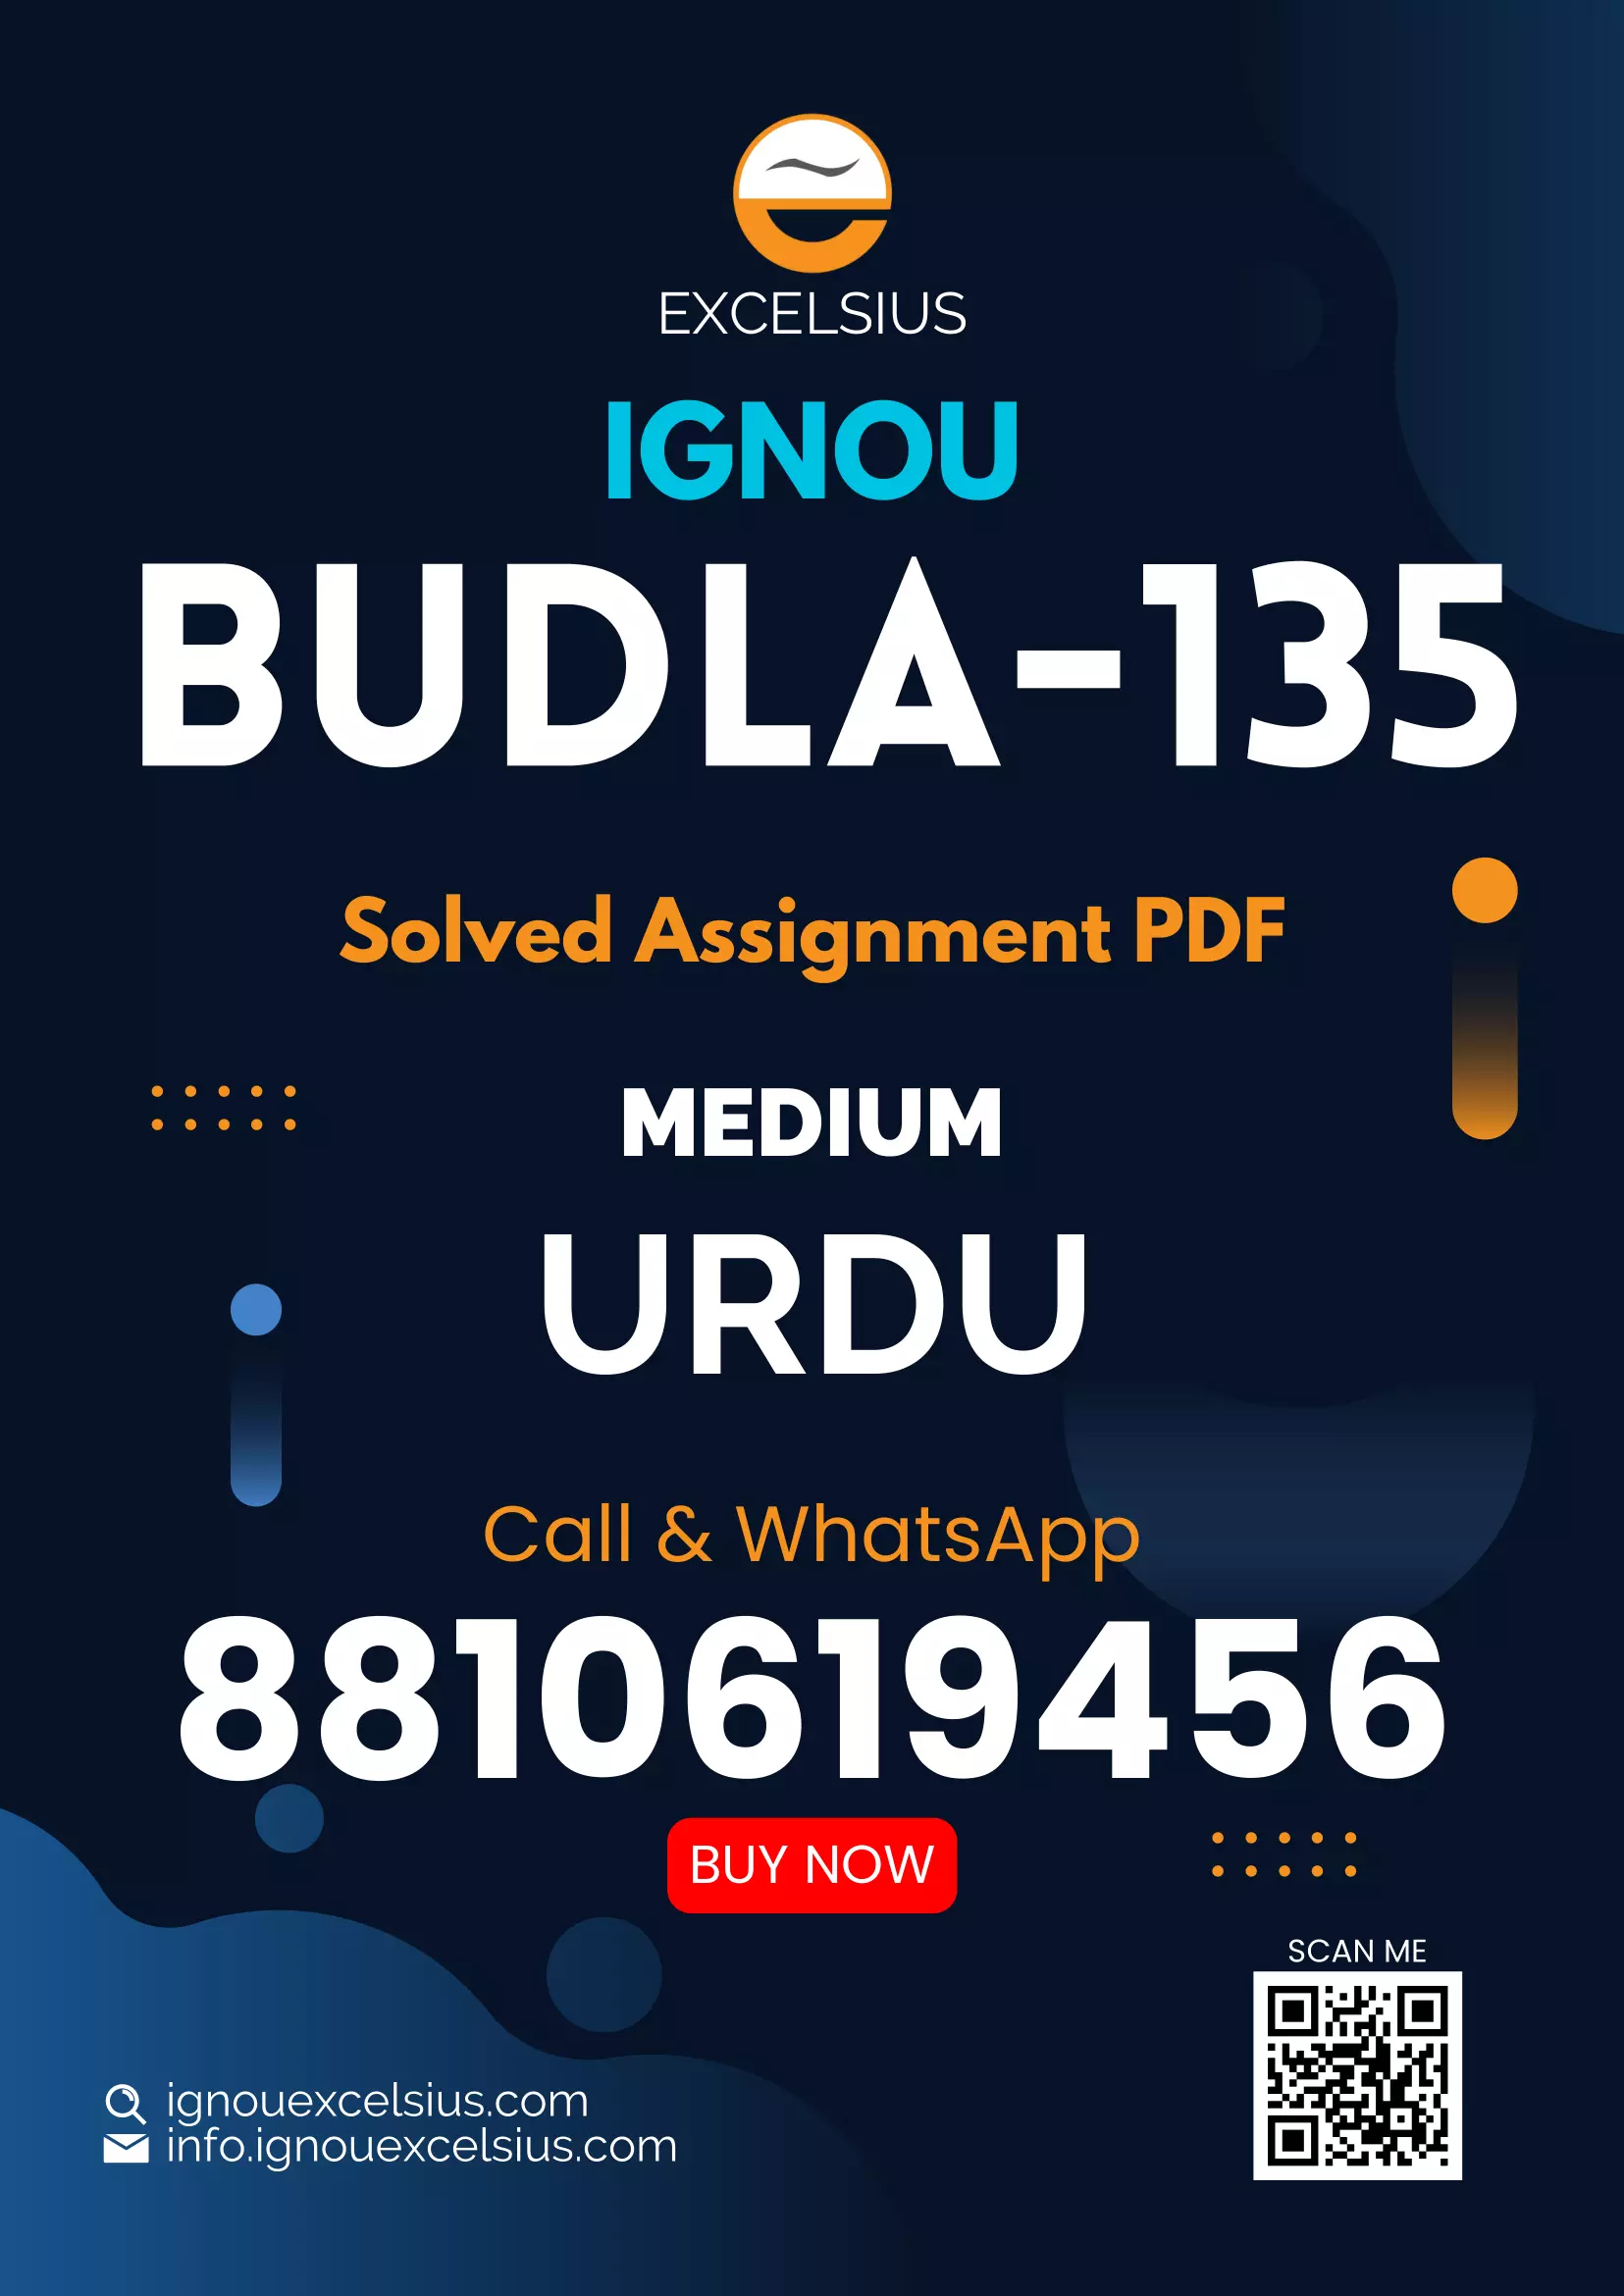 IGNOU BUDLA-135 - Study of Modern Urdu Prose & Poetry, Latest Solved Assignment-July 2022 – January 2023